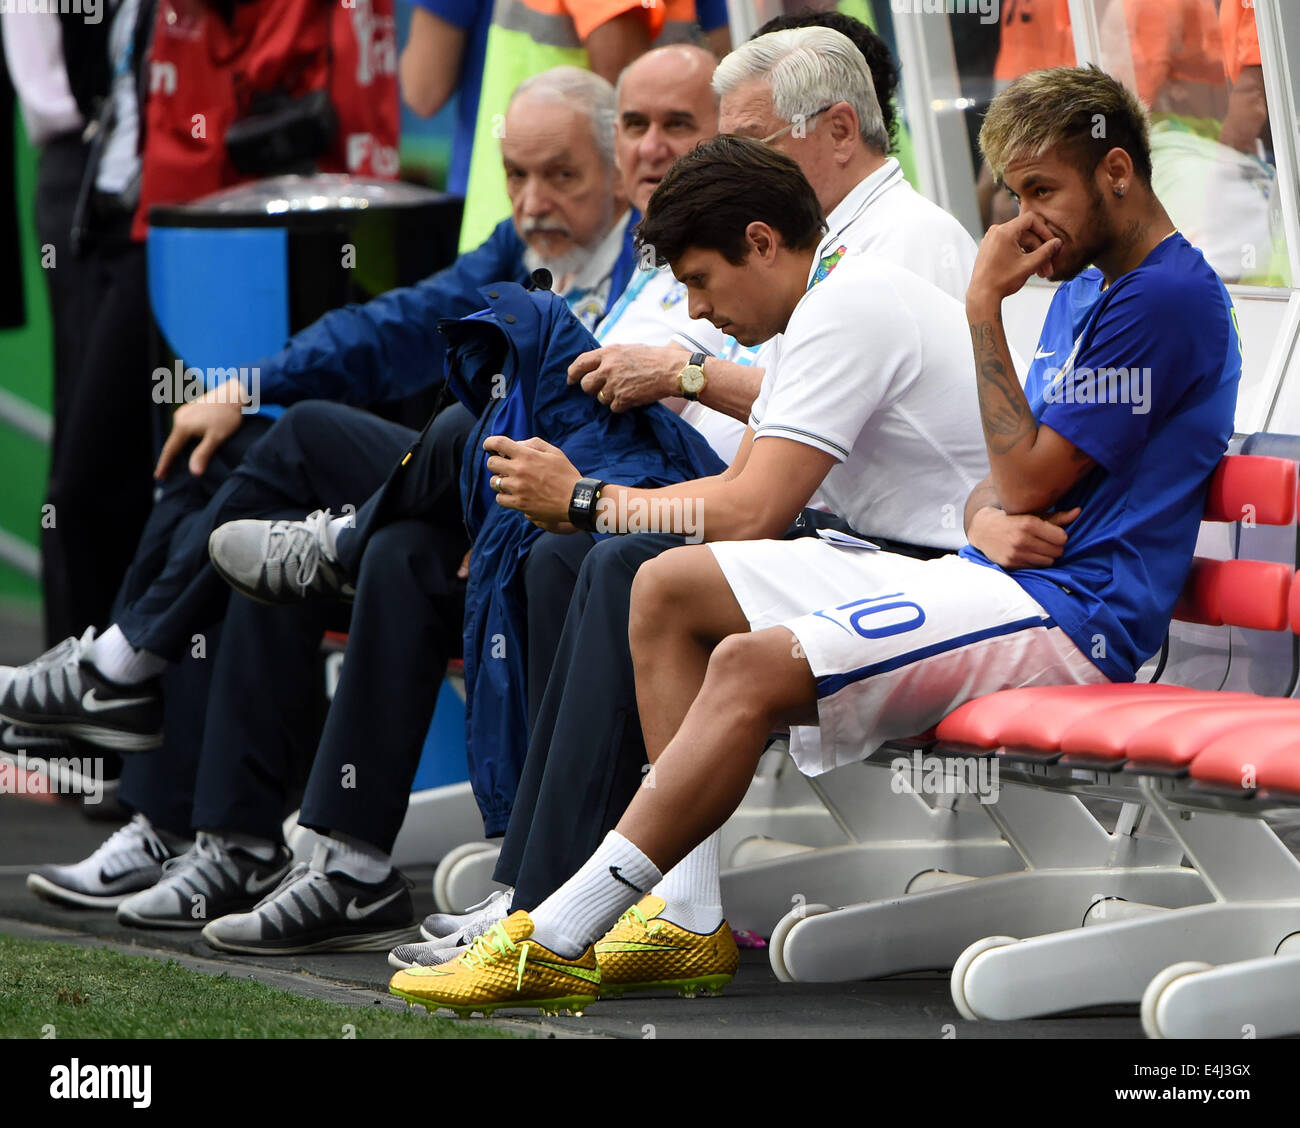 Brasilia, Brazil. 12th July, 2014. Brazil's Neymar (1st R) watches teammates' training on the bench before the third place play-off match between Brazil and Netherlands of 2014 FIFA World Cup at the Estadio Nacional Stadium in Brasilia, Brazil, on July 12, 2014. Credit:  Guo Yong/Xinhua/Alamy Live News Stock Photo